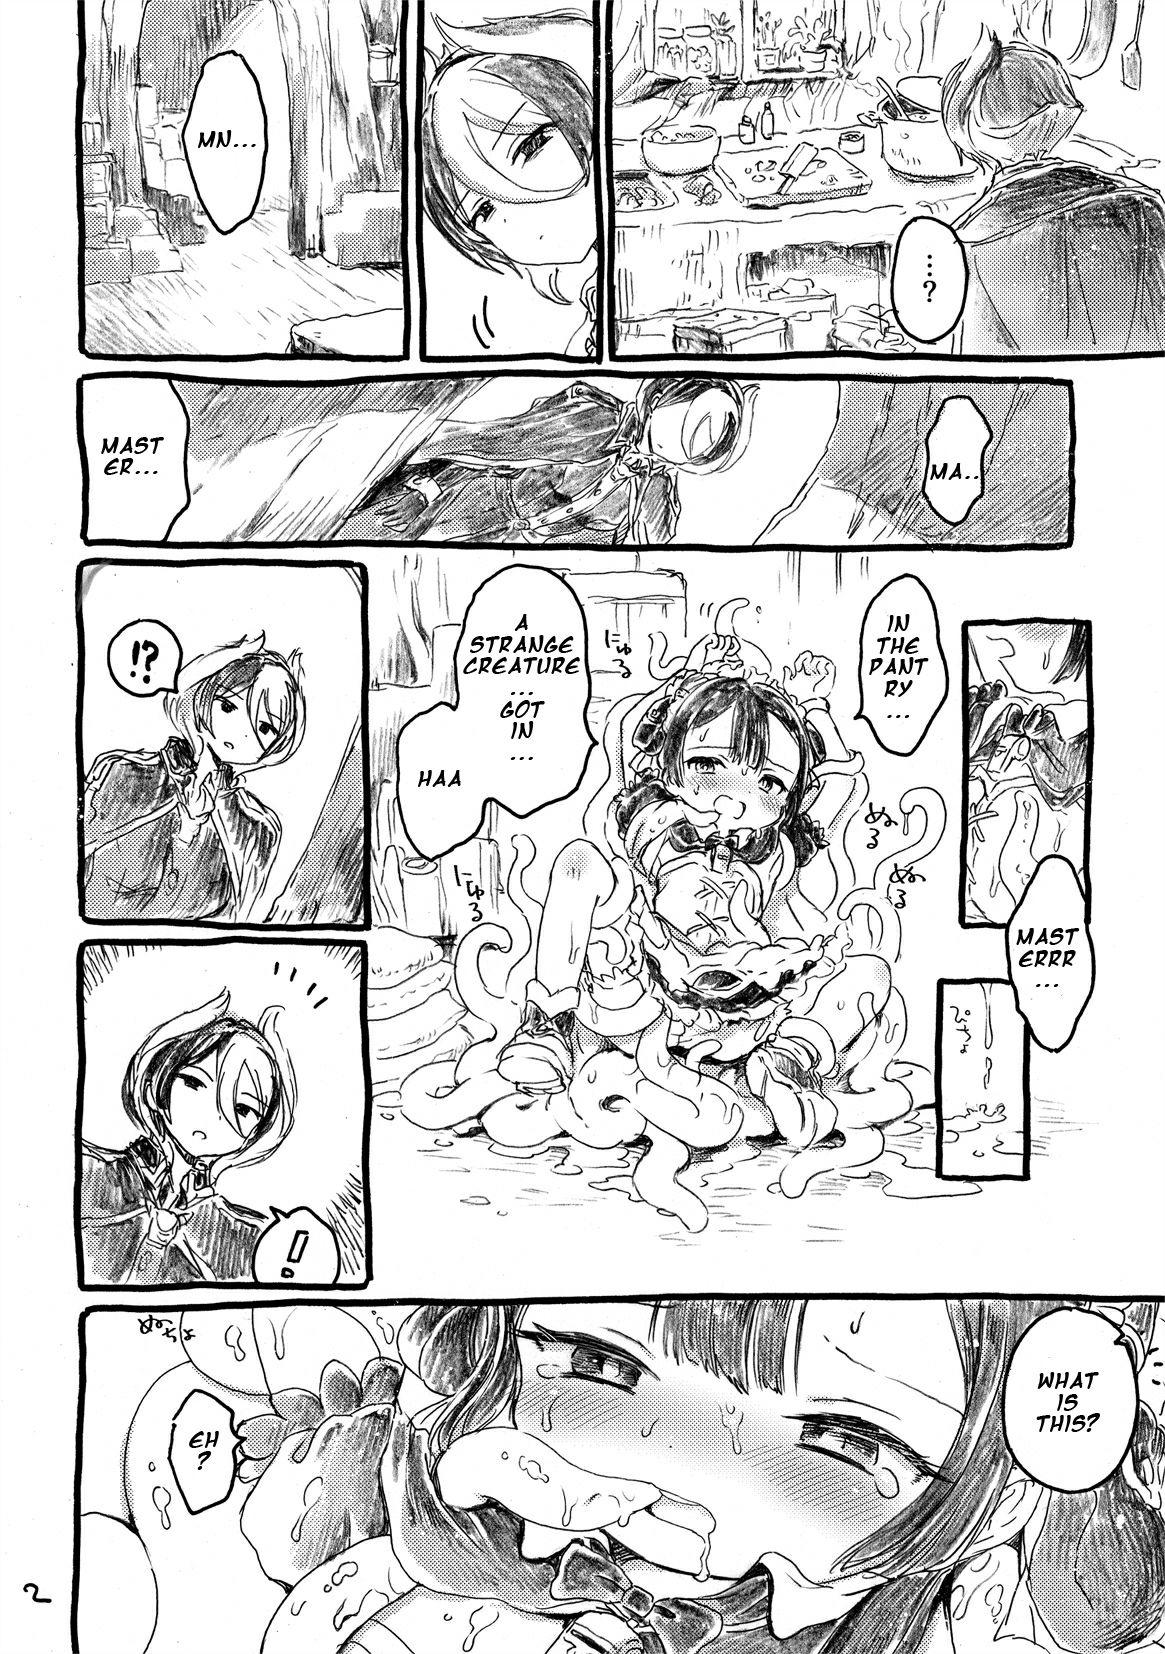 Doll Fudou Kyou to Marulk no Abyss - Made in abyss Girlnextdoor - Page 2